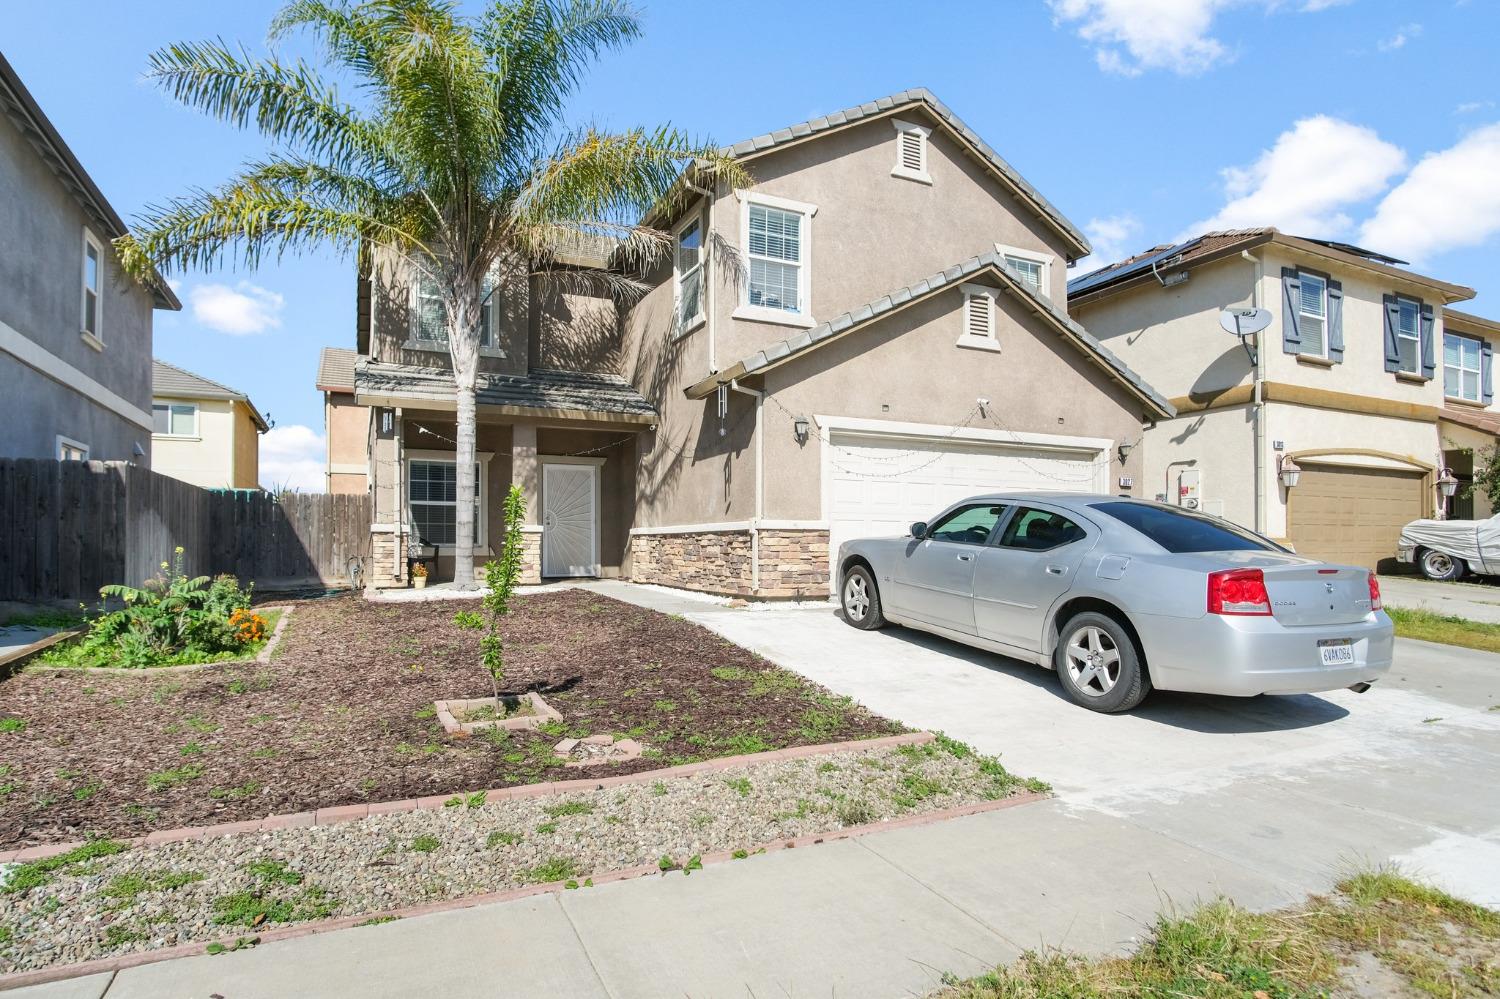 Photo of 3027 Sariya Wy in Ceres, CA